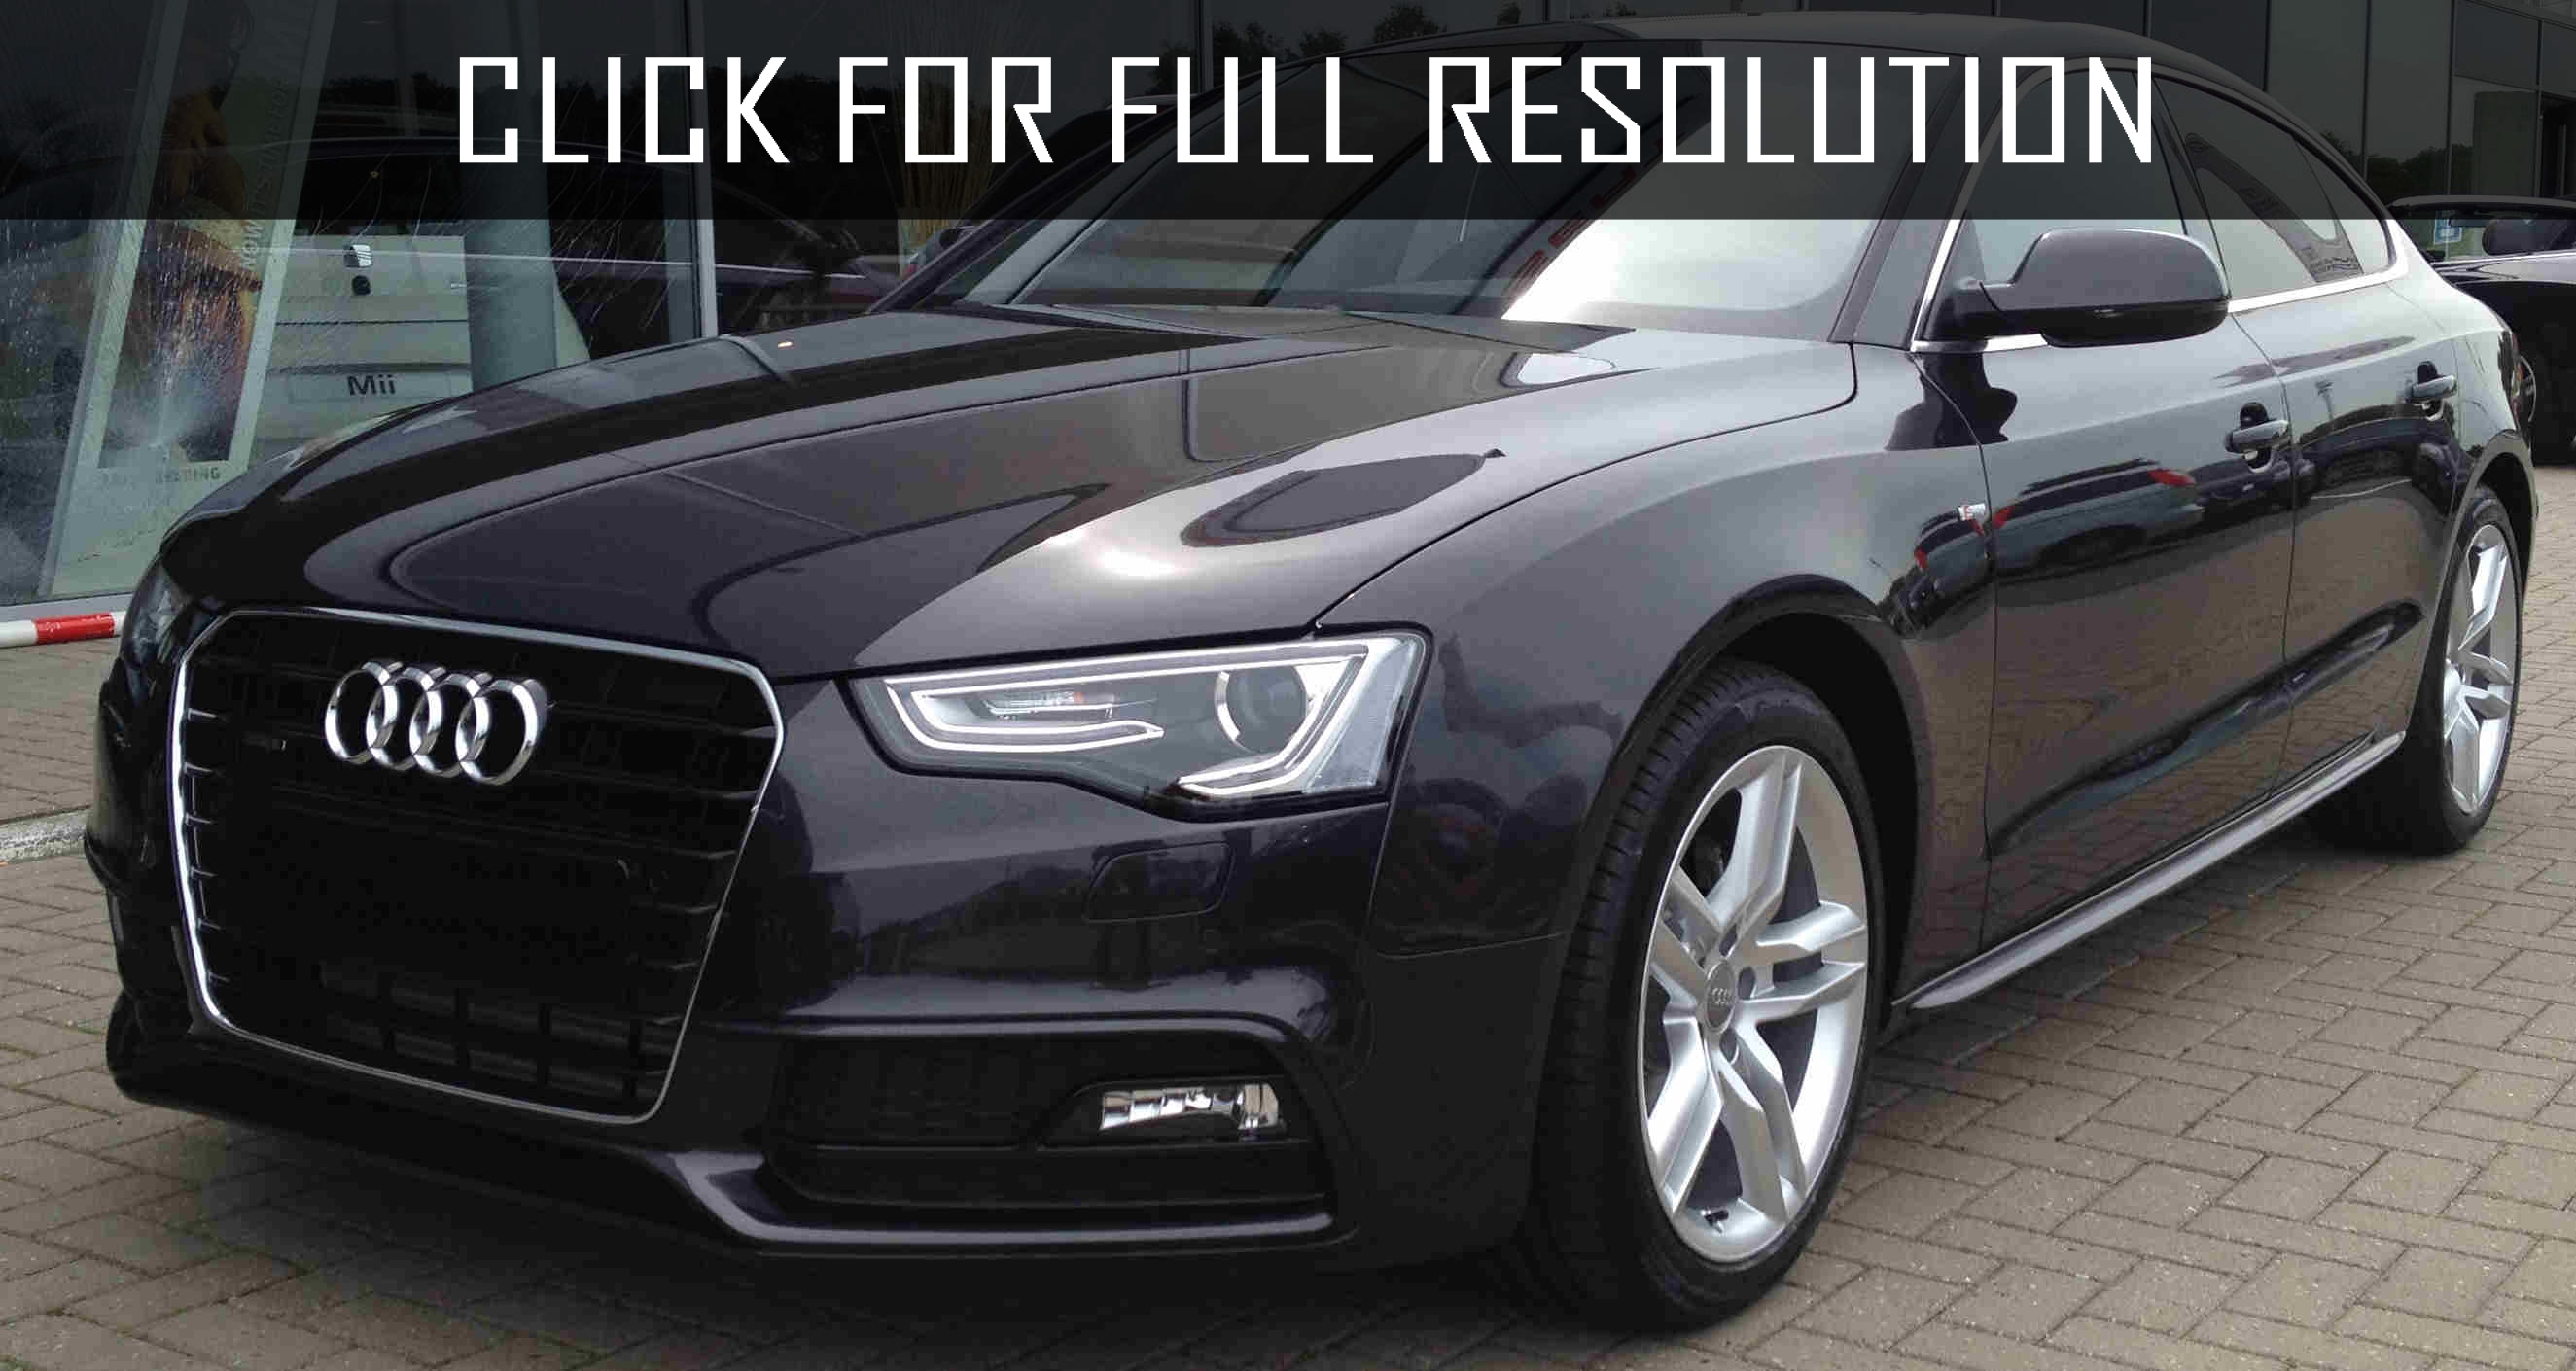 13 Audi A5 S Line News Reviews Msrp Ratings With Amazing Images